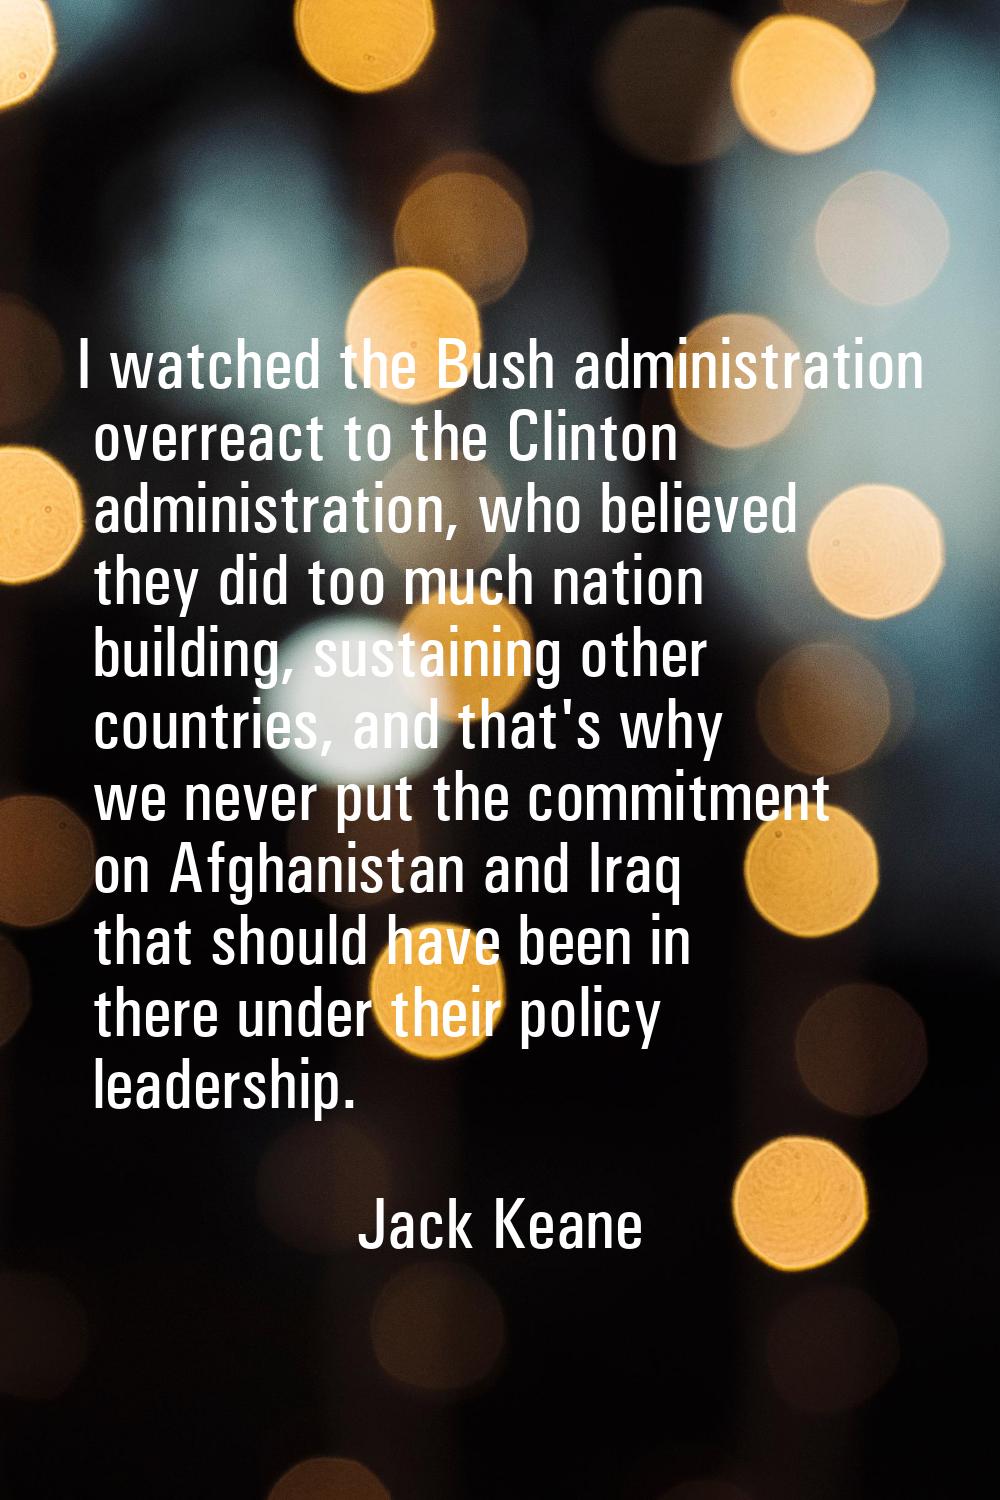 I watched the Bush administration overreact to the Clinton administration, who believed they did to